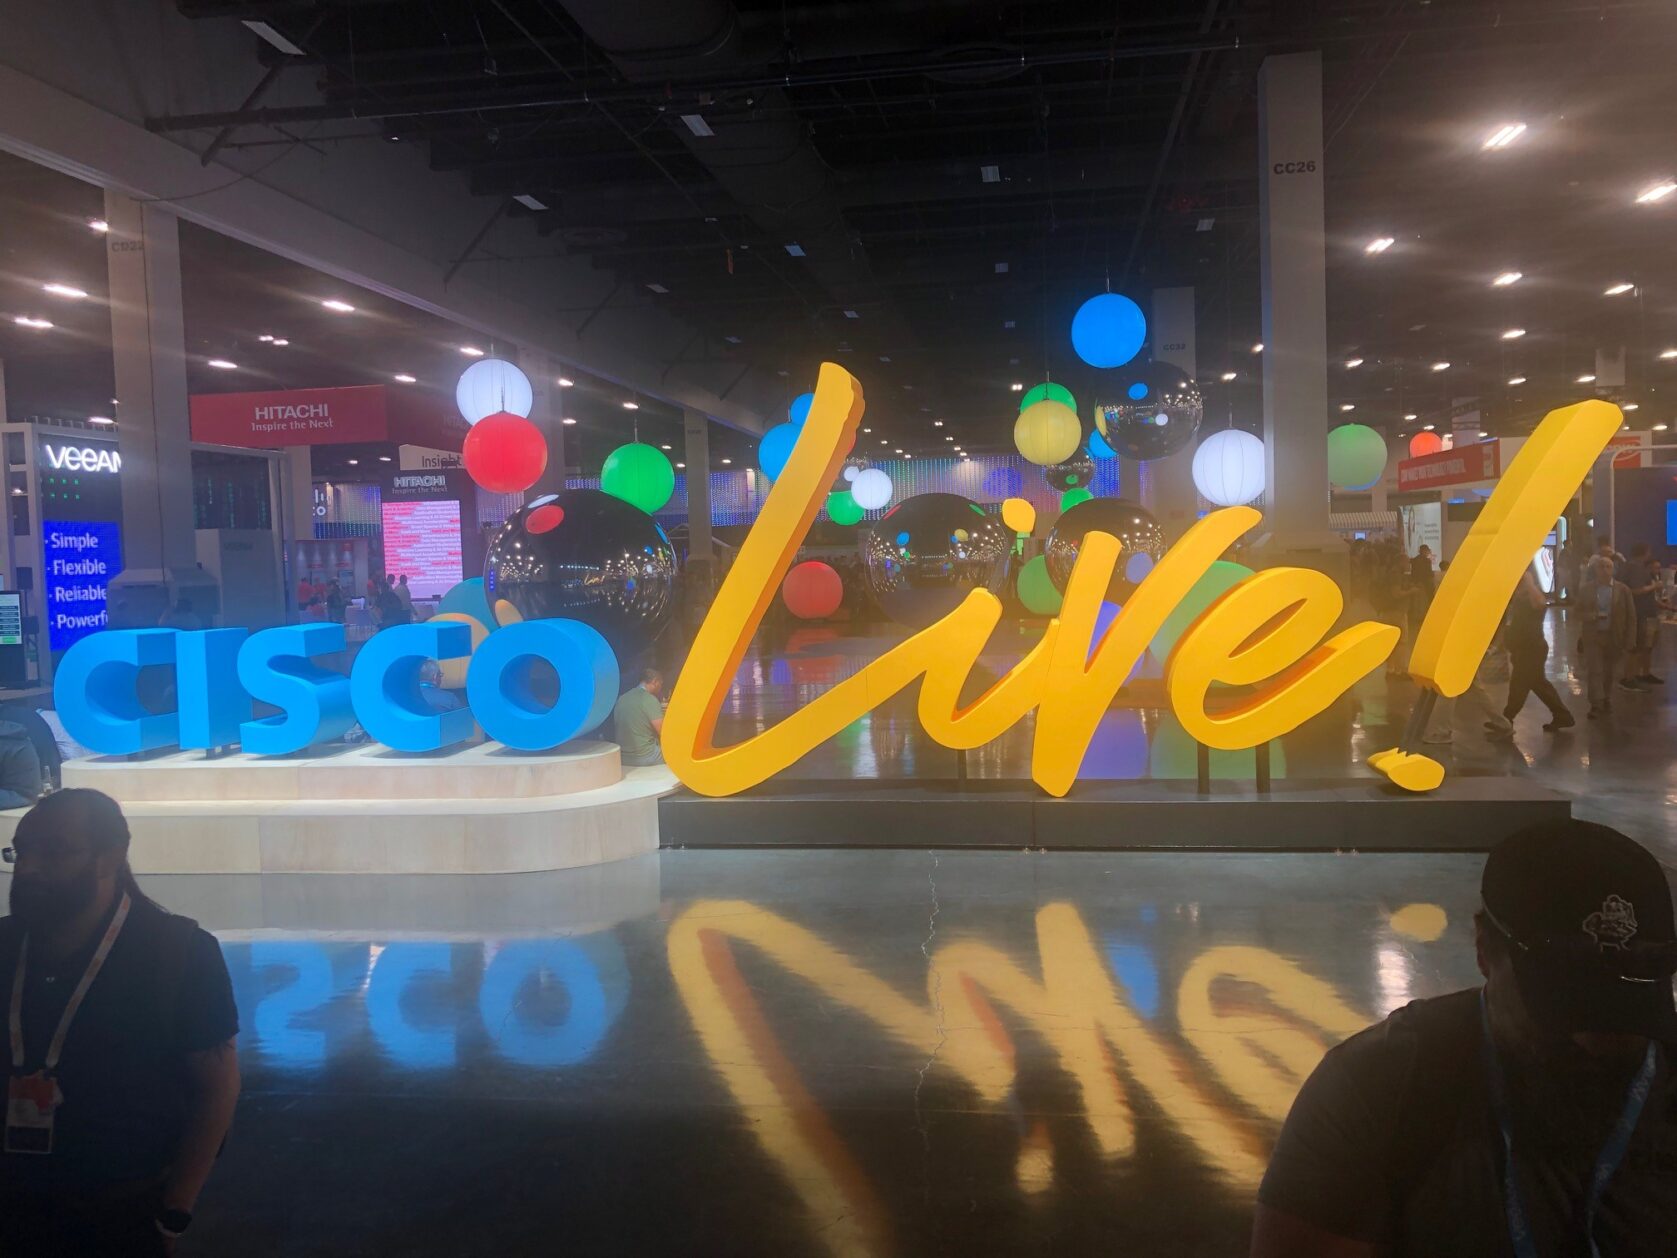 CiscoLive is Back!